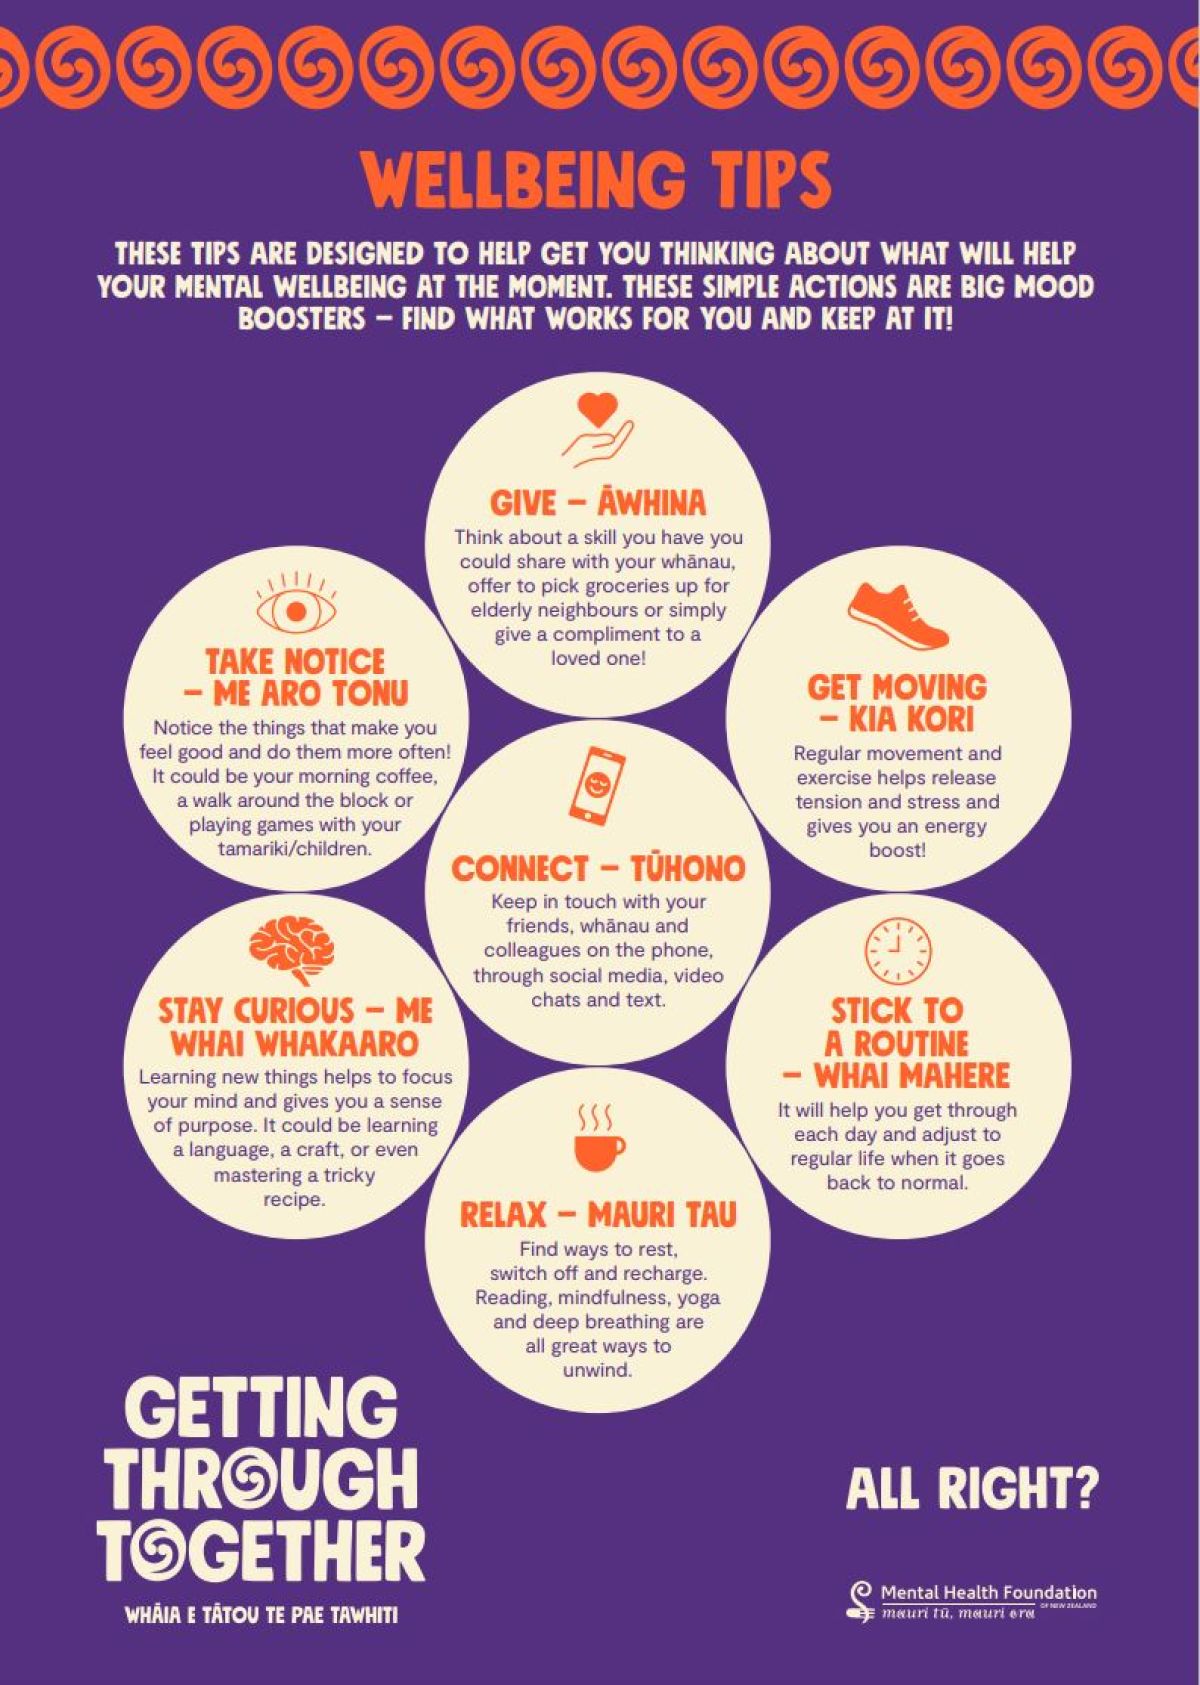 getting through together well being tips